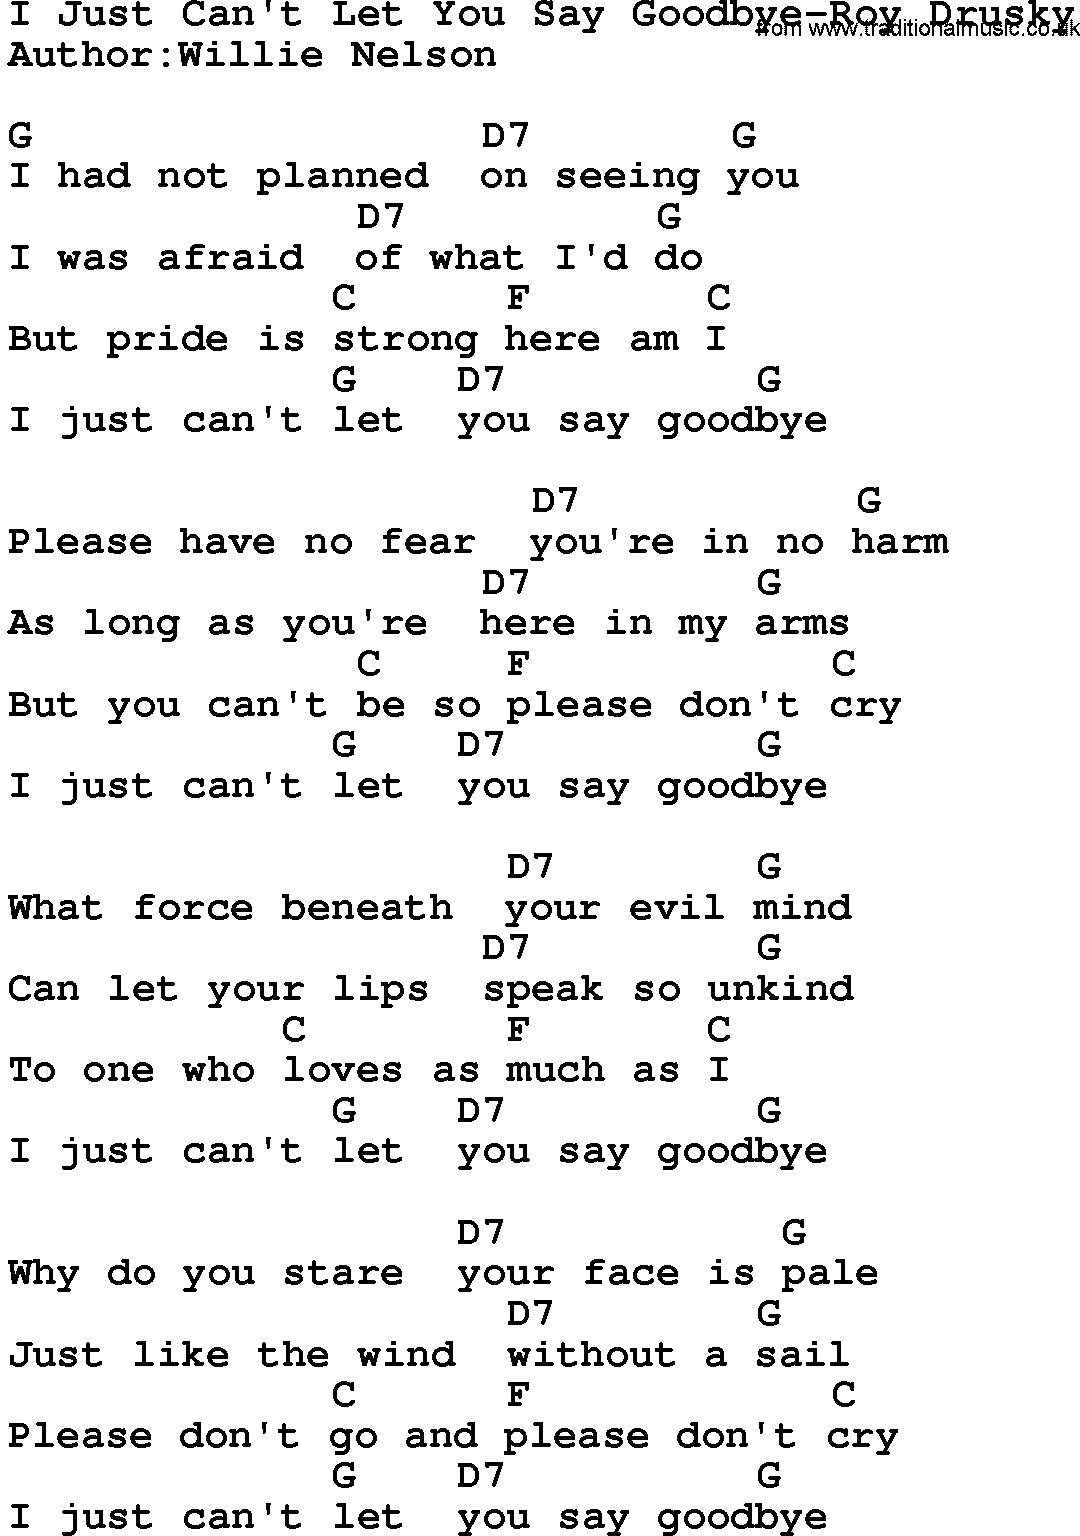 Country music song: I Just Can't Let You Say Goodbye-Roy Drusky lyrics and chords